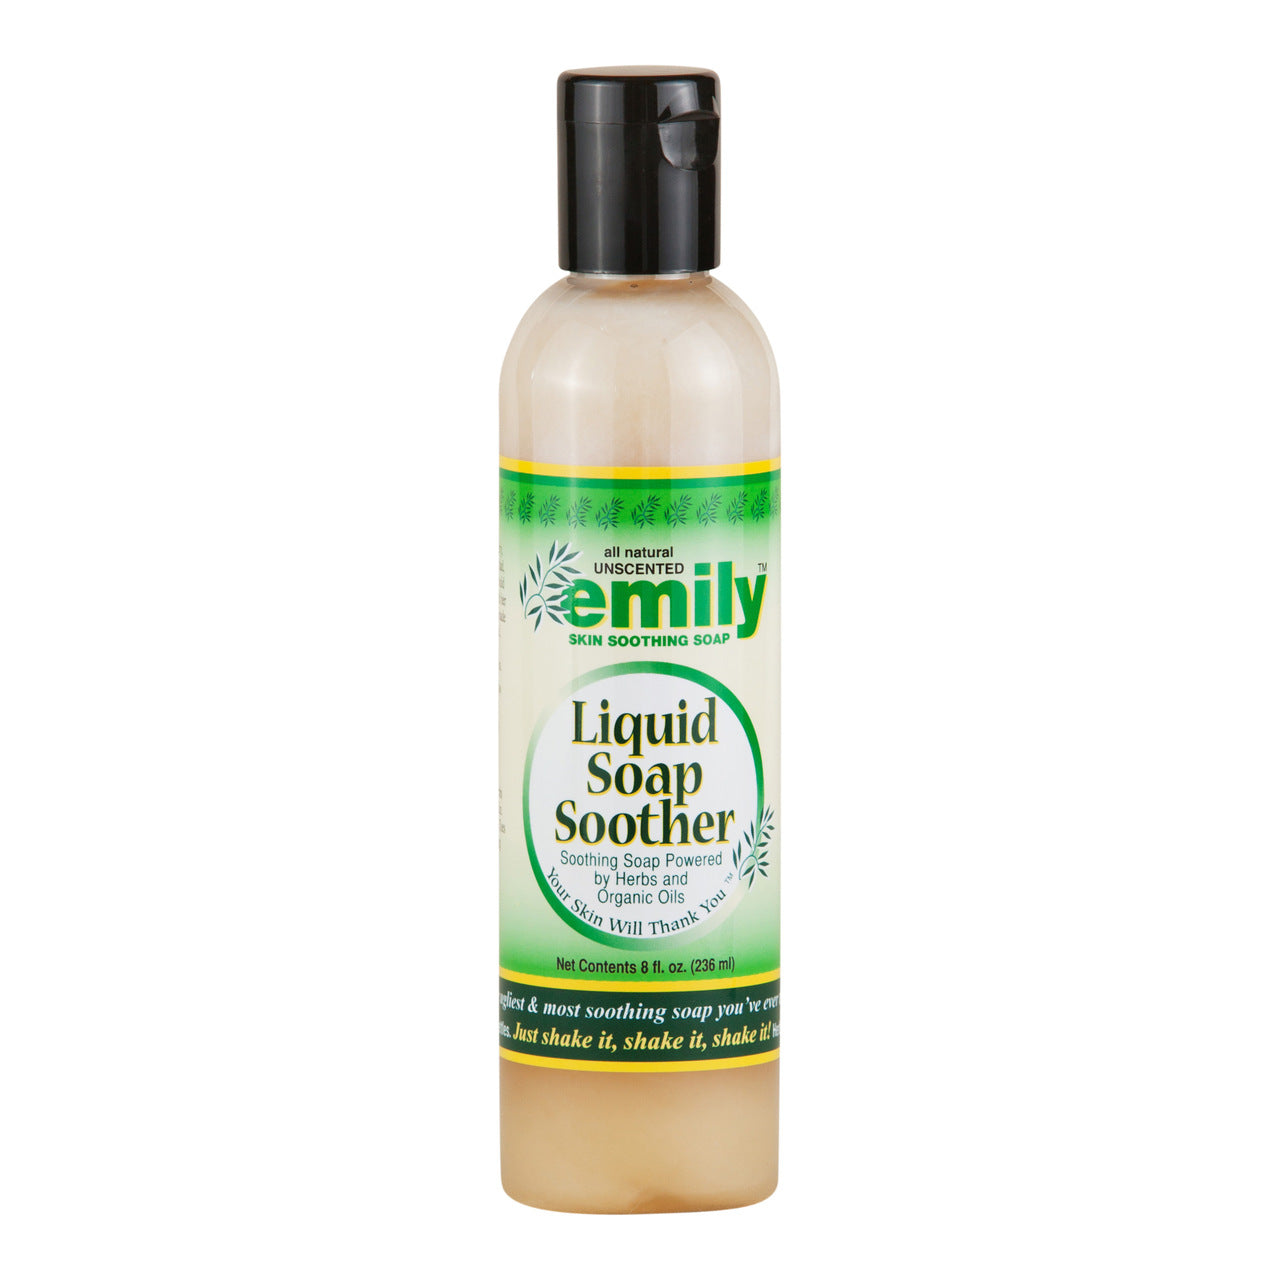 One bottle of emily's liquid skin soother, a natural body wash for eczema with chinese herbs. show against a white background.